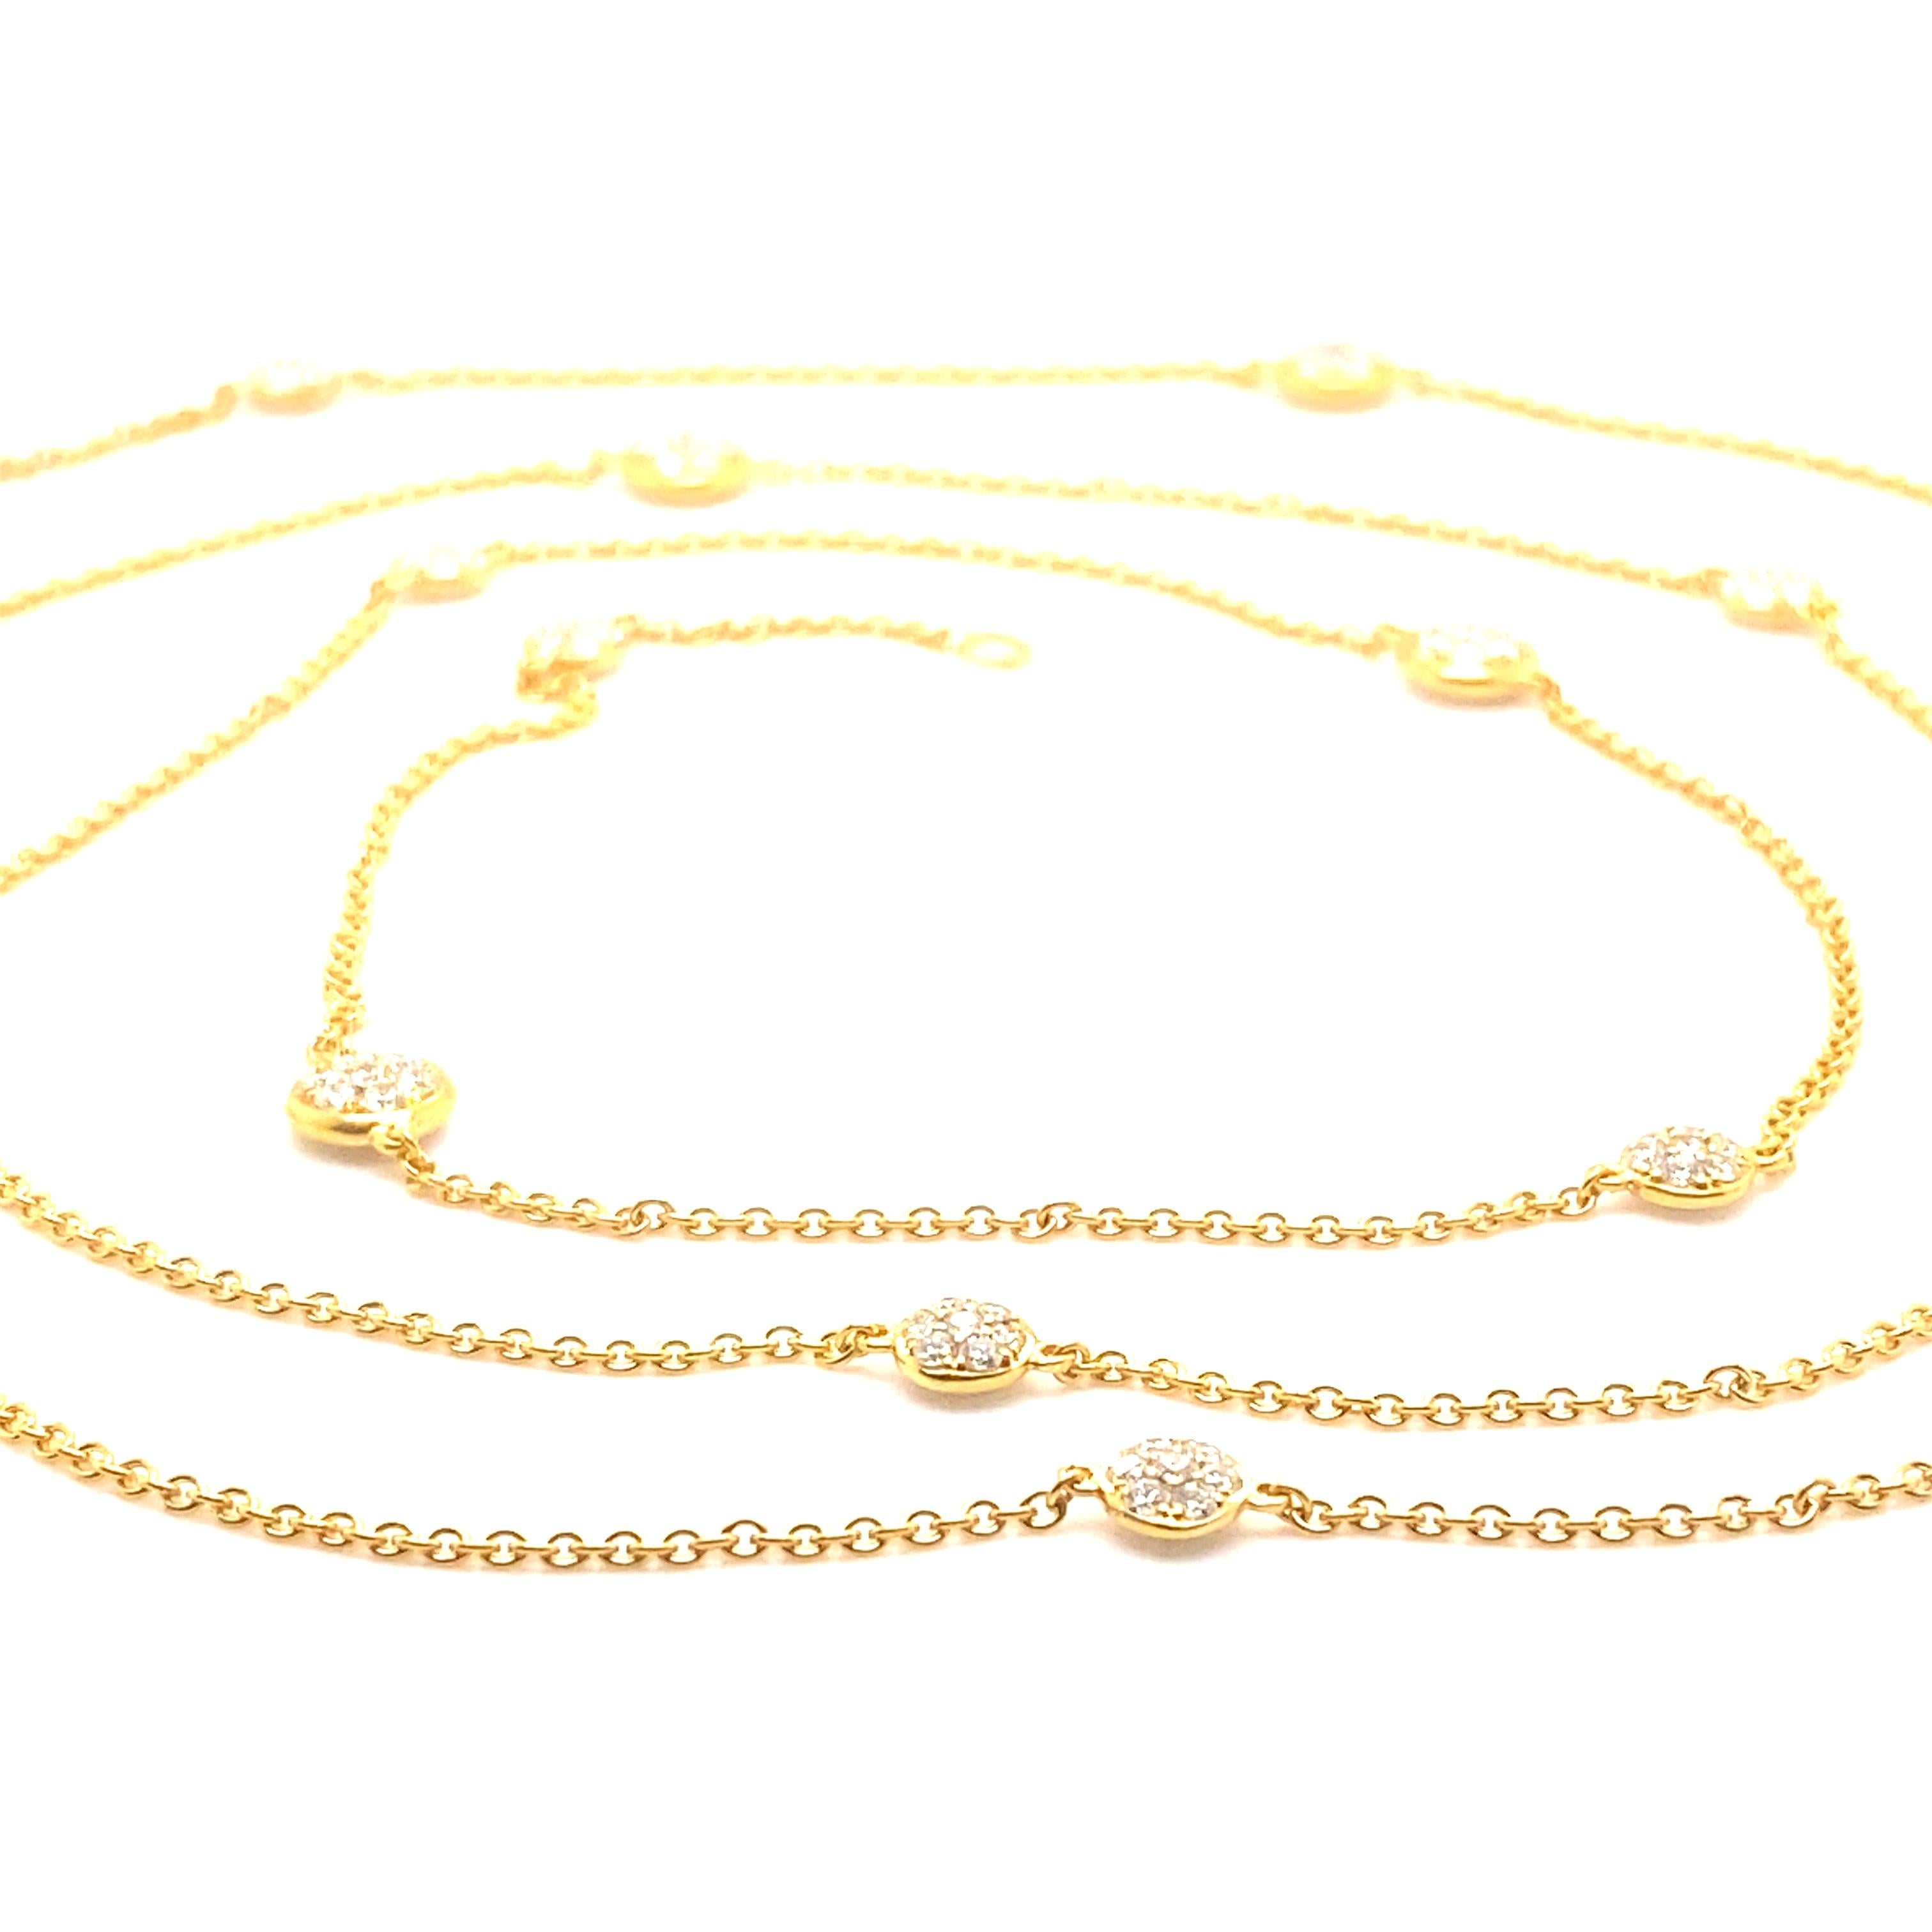 18K YELLOW GOLD CHAIN NECKLACE 40